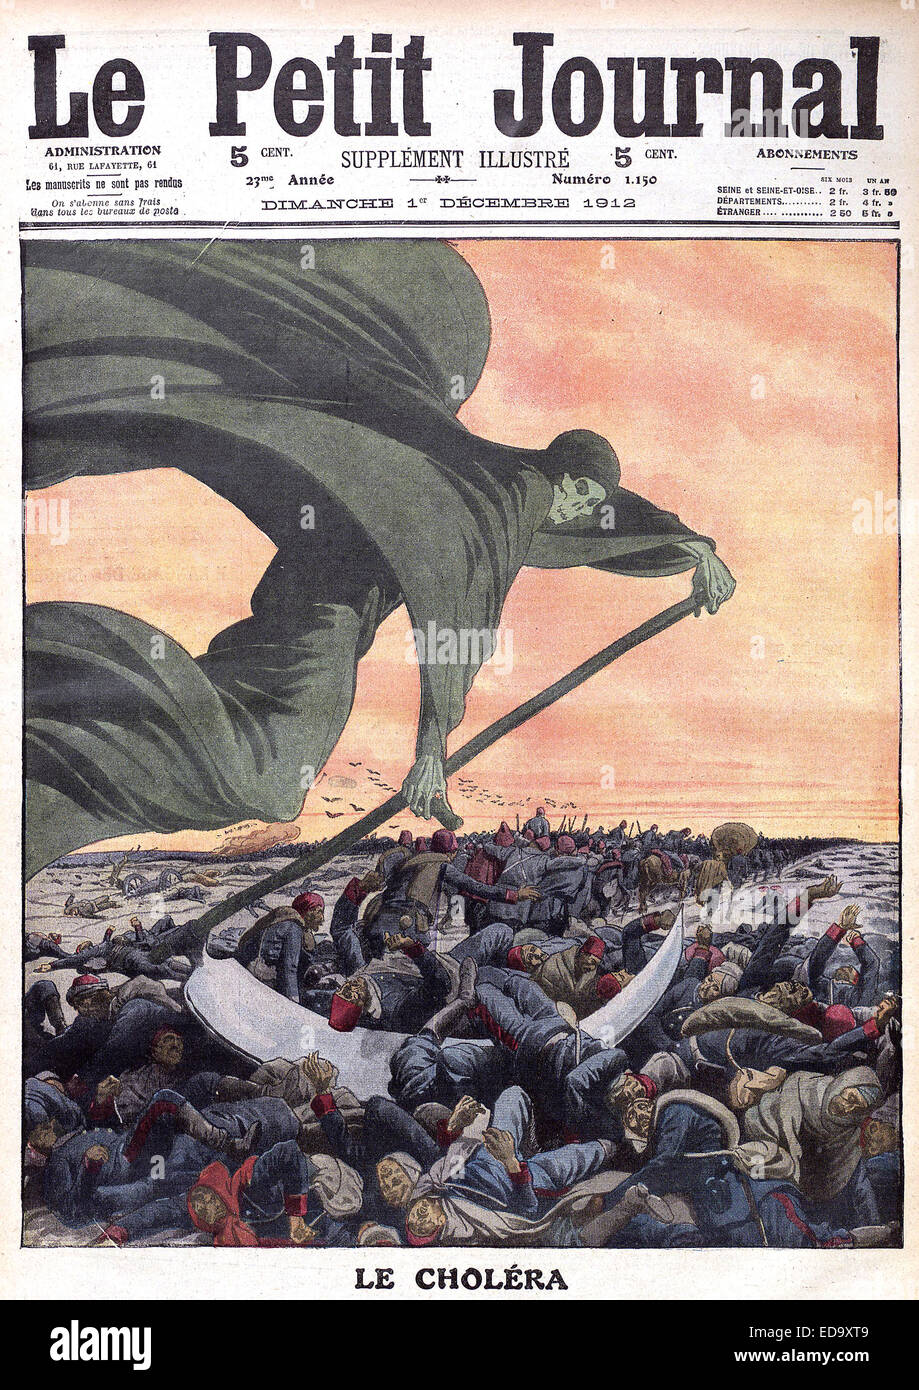 LE PETIT JOURNAL French weekly magazine 1 December 1912 illustrates the Sixth Cholera Epidemic which mainly affected Russia and the Ottoman Empire between 1899 and 1923 Stock Photo